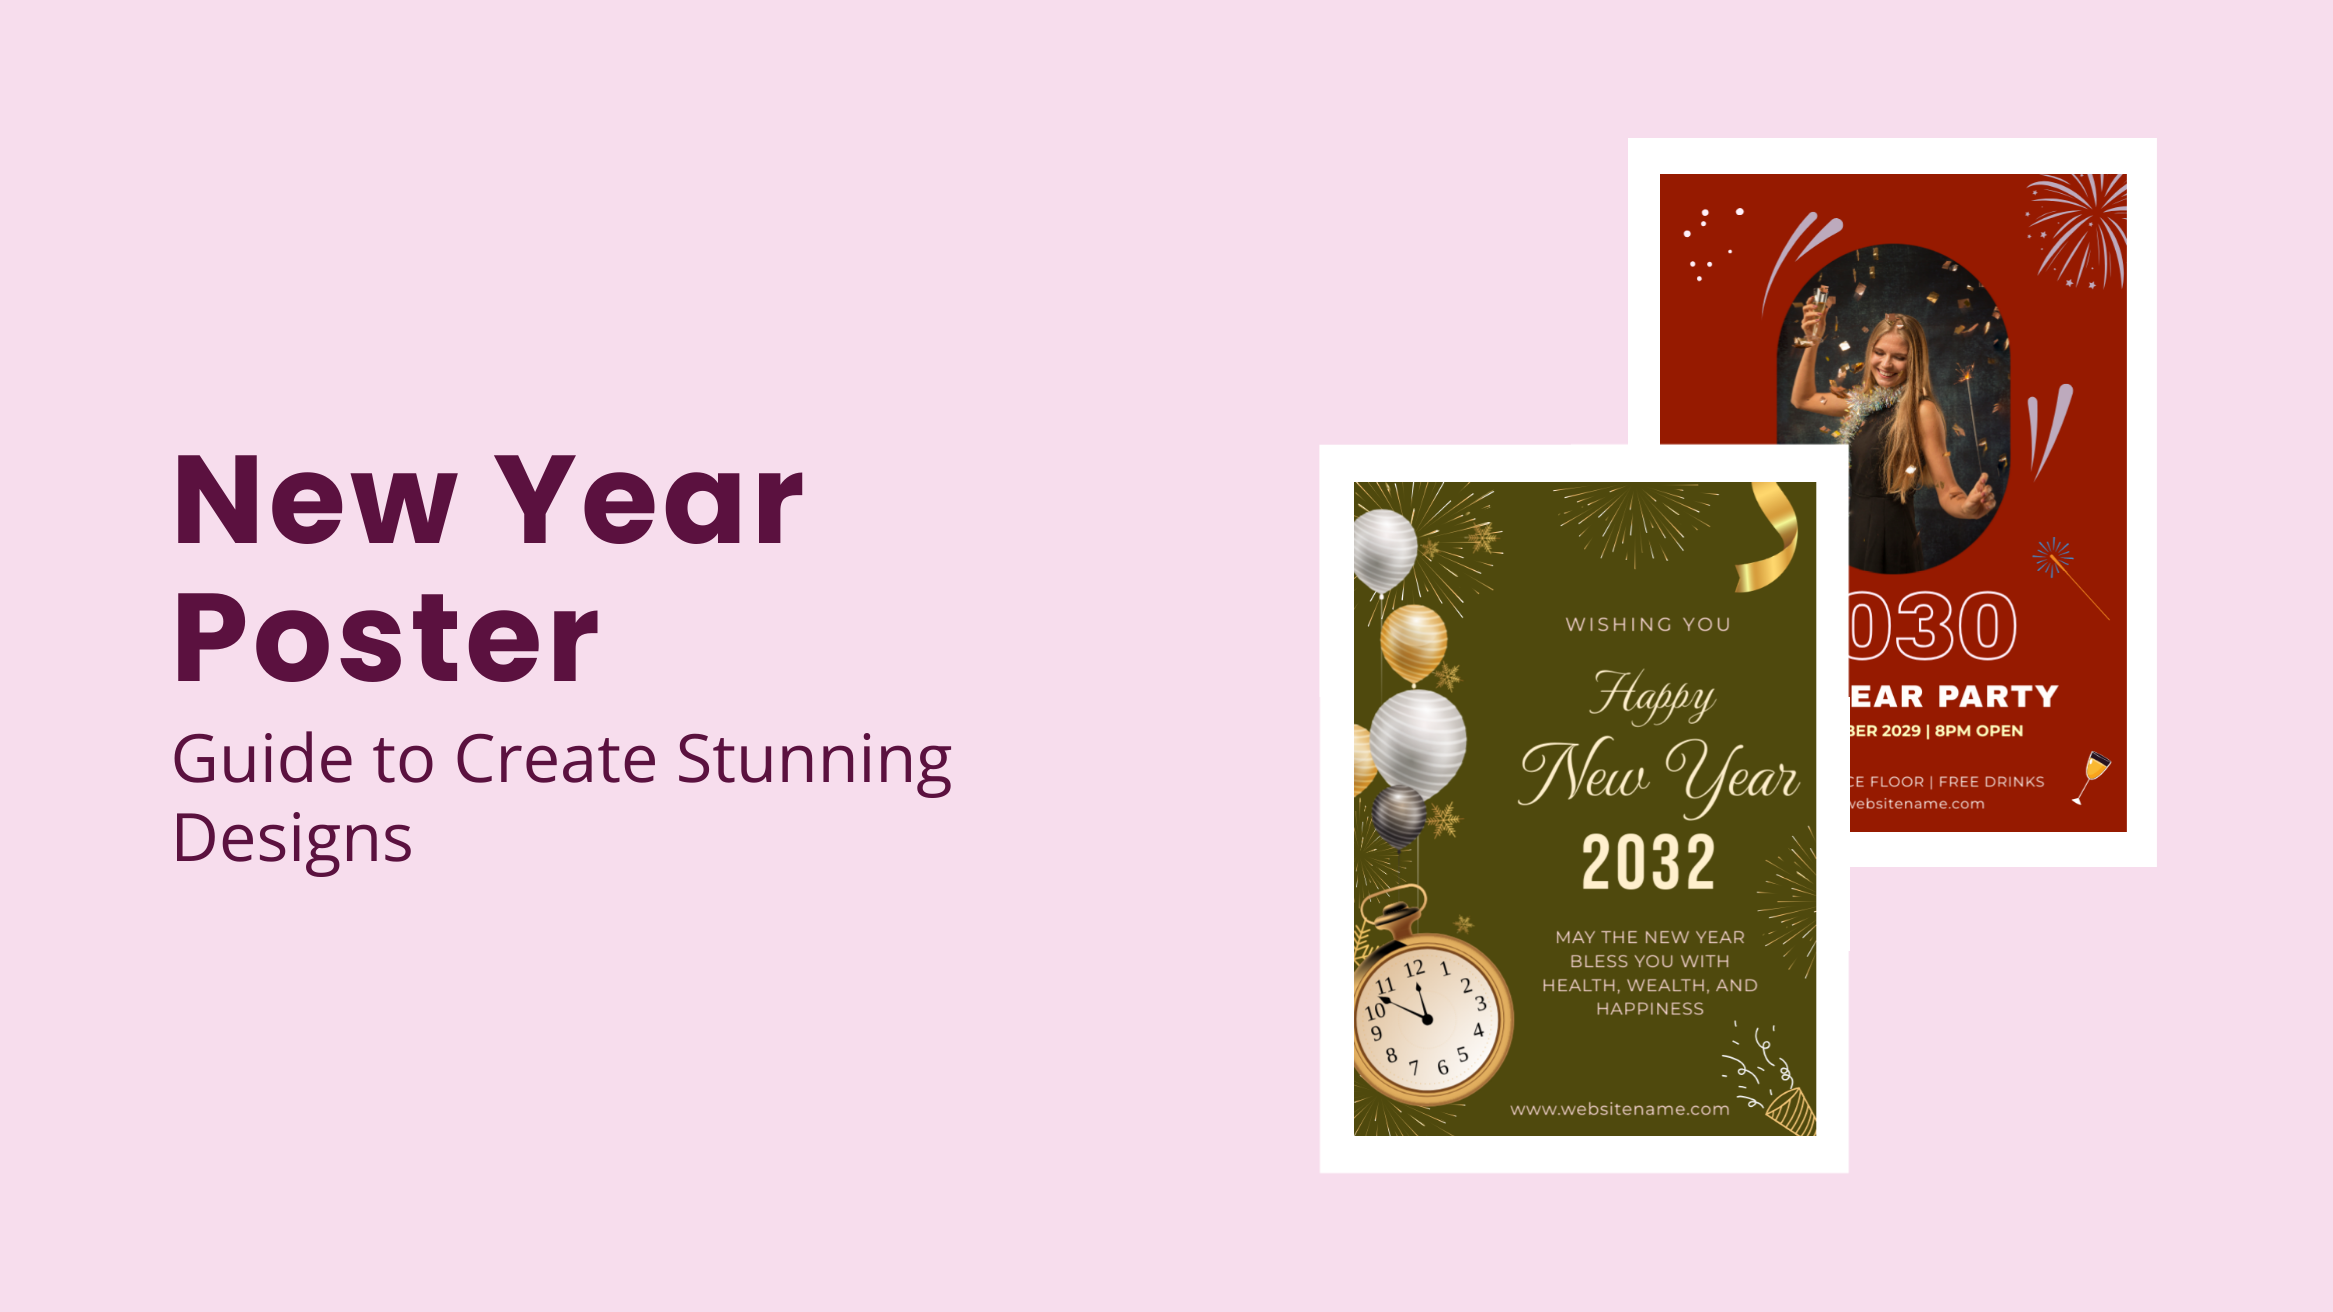 New Year Poster - Guide to Create Stunning Designs